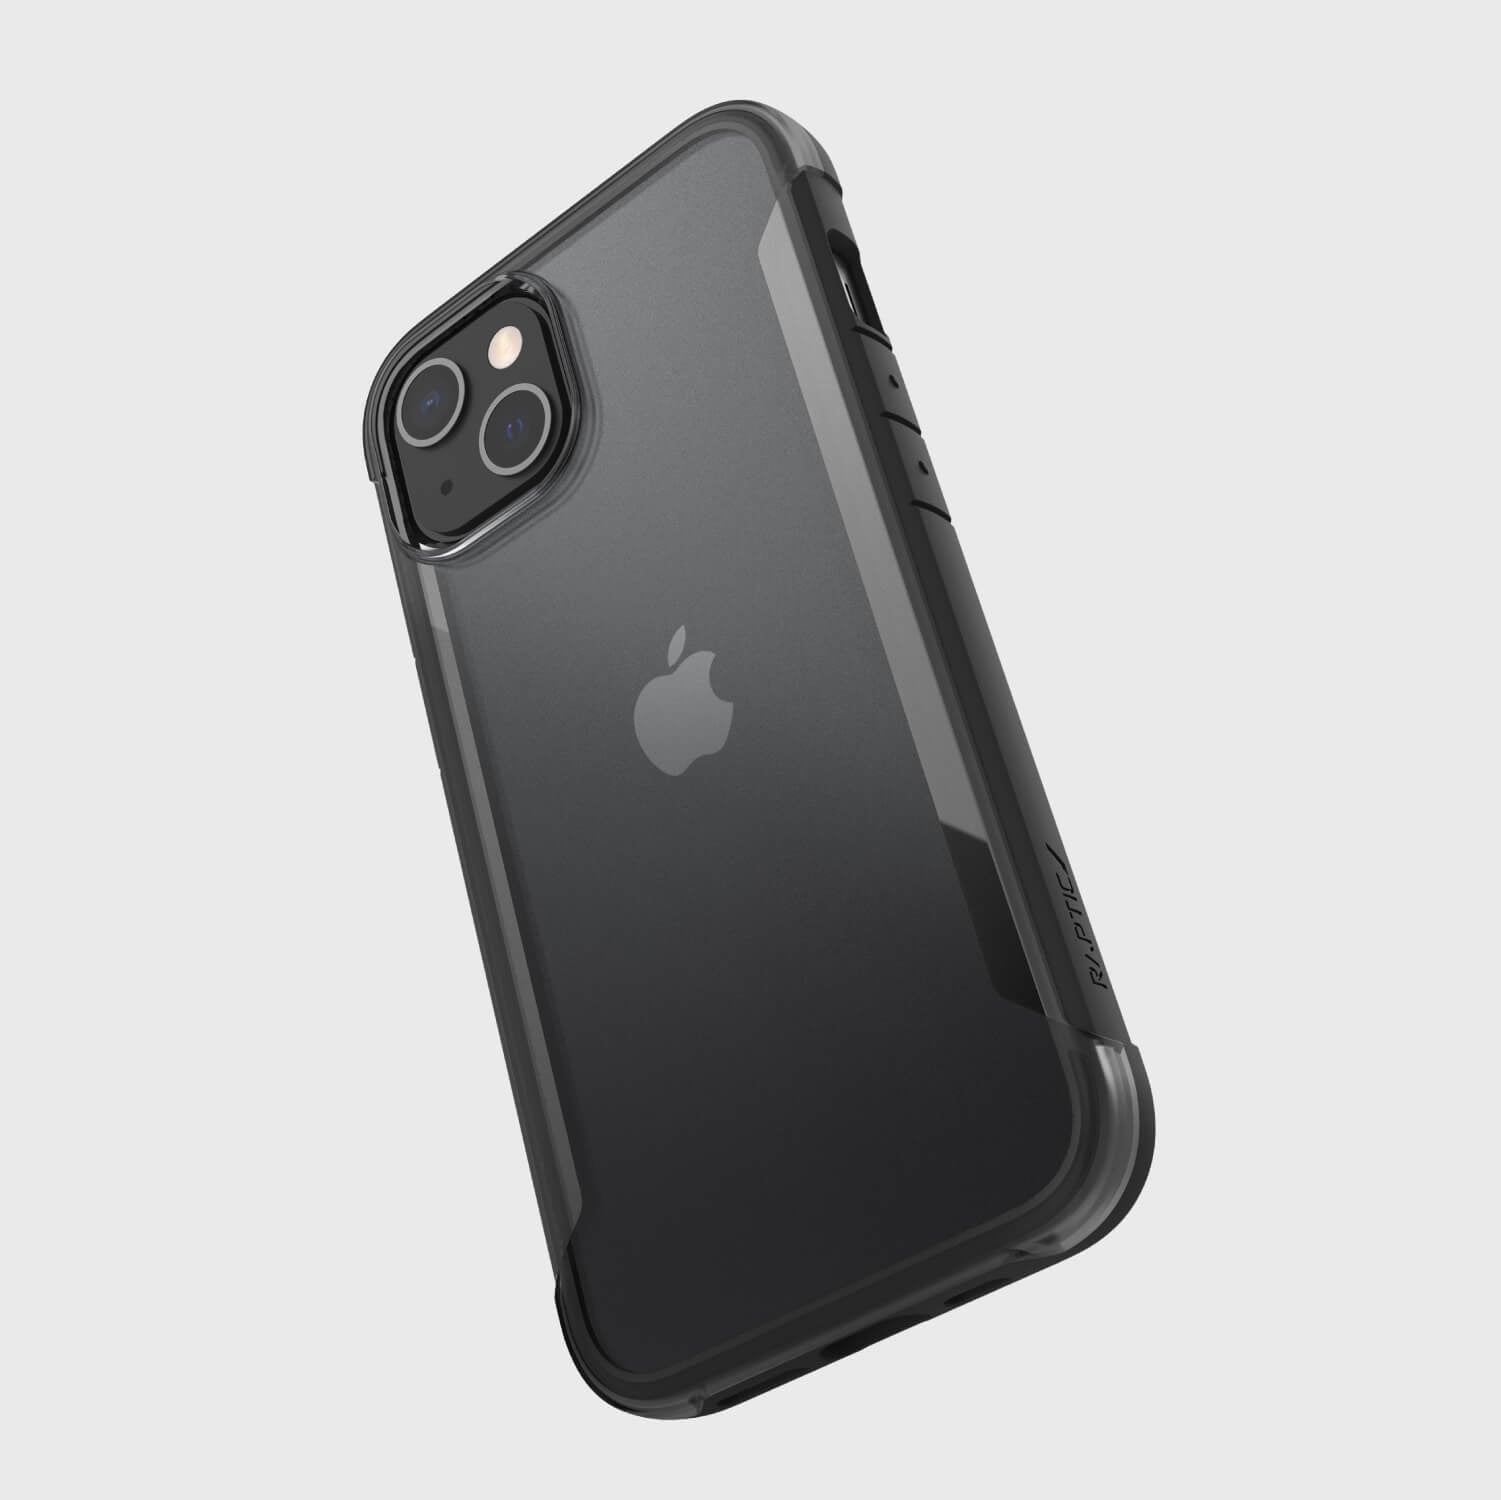 The eco-friendly iPhone 13 Case - TERRAIN by Raptic is shown in black.